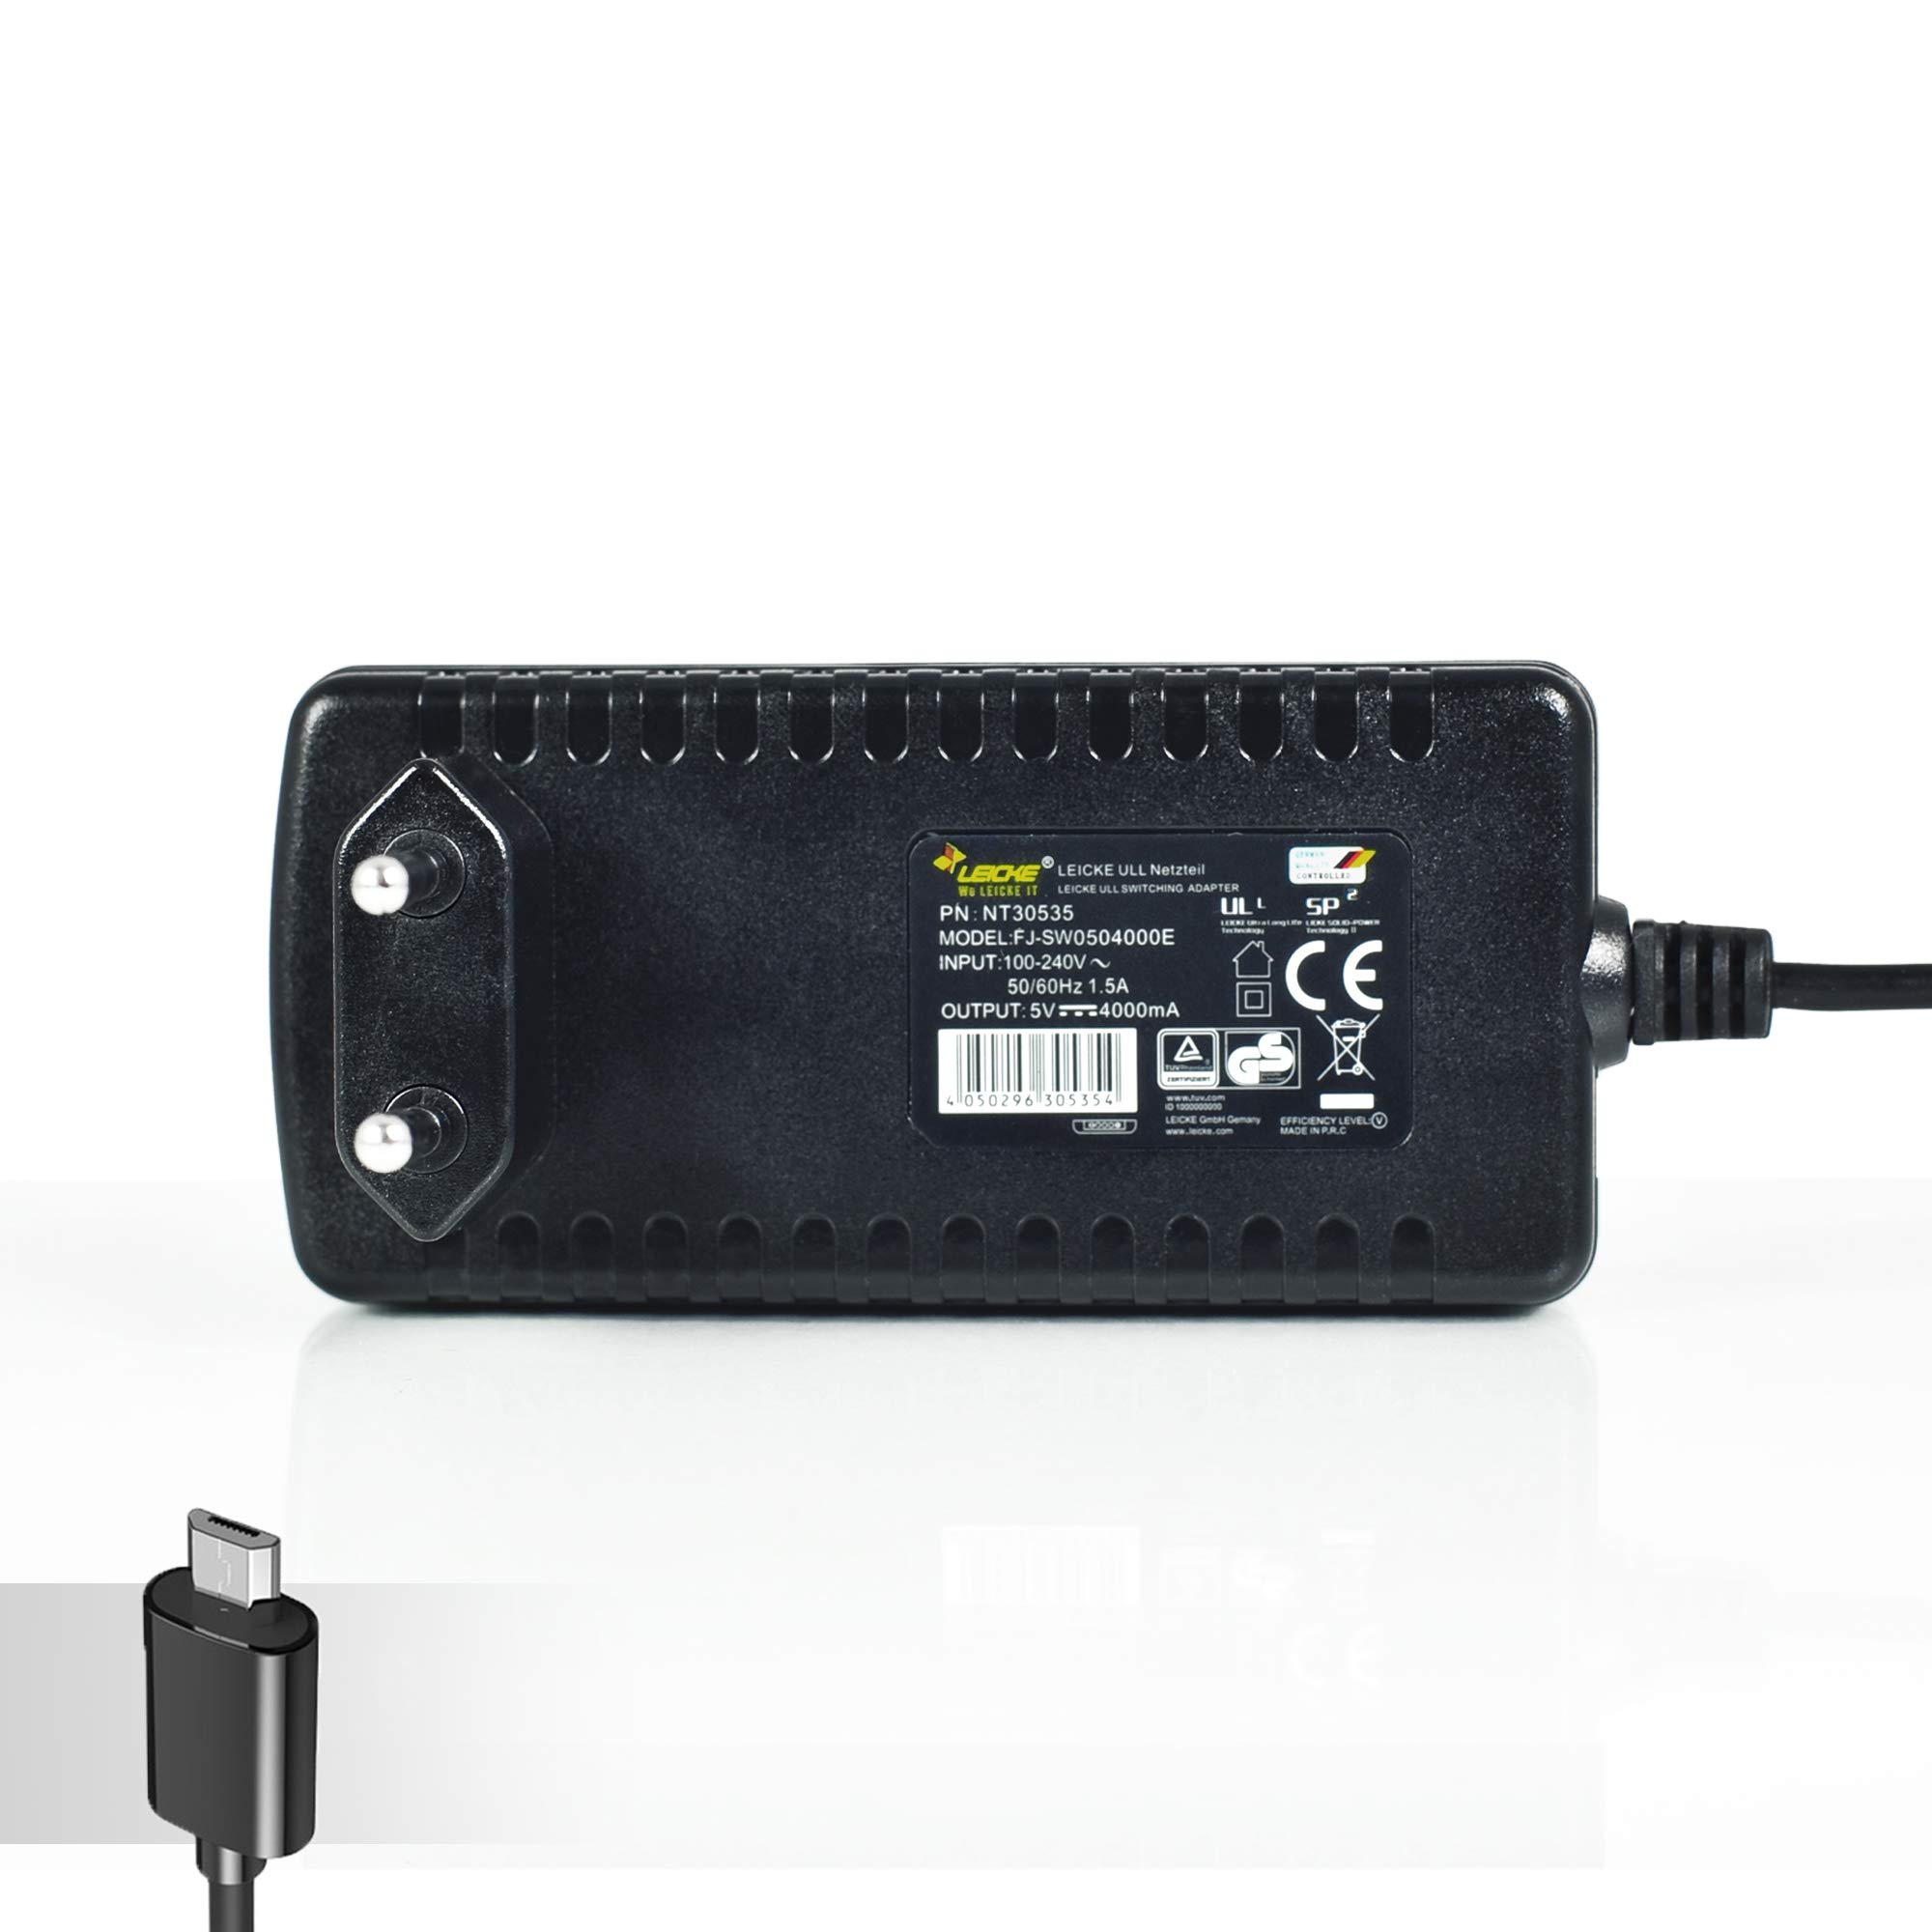 LEICKE 20W Netzteil 5V Netzteil,Charger Power-Switch, USB Micro 4A Mit